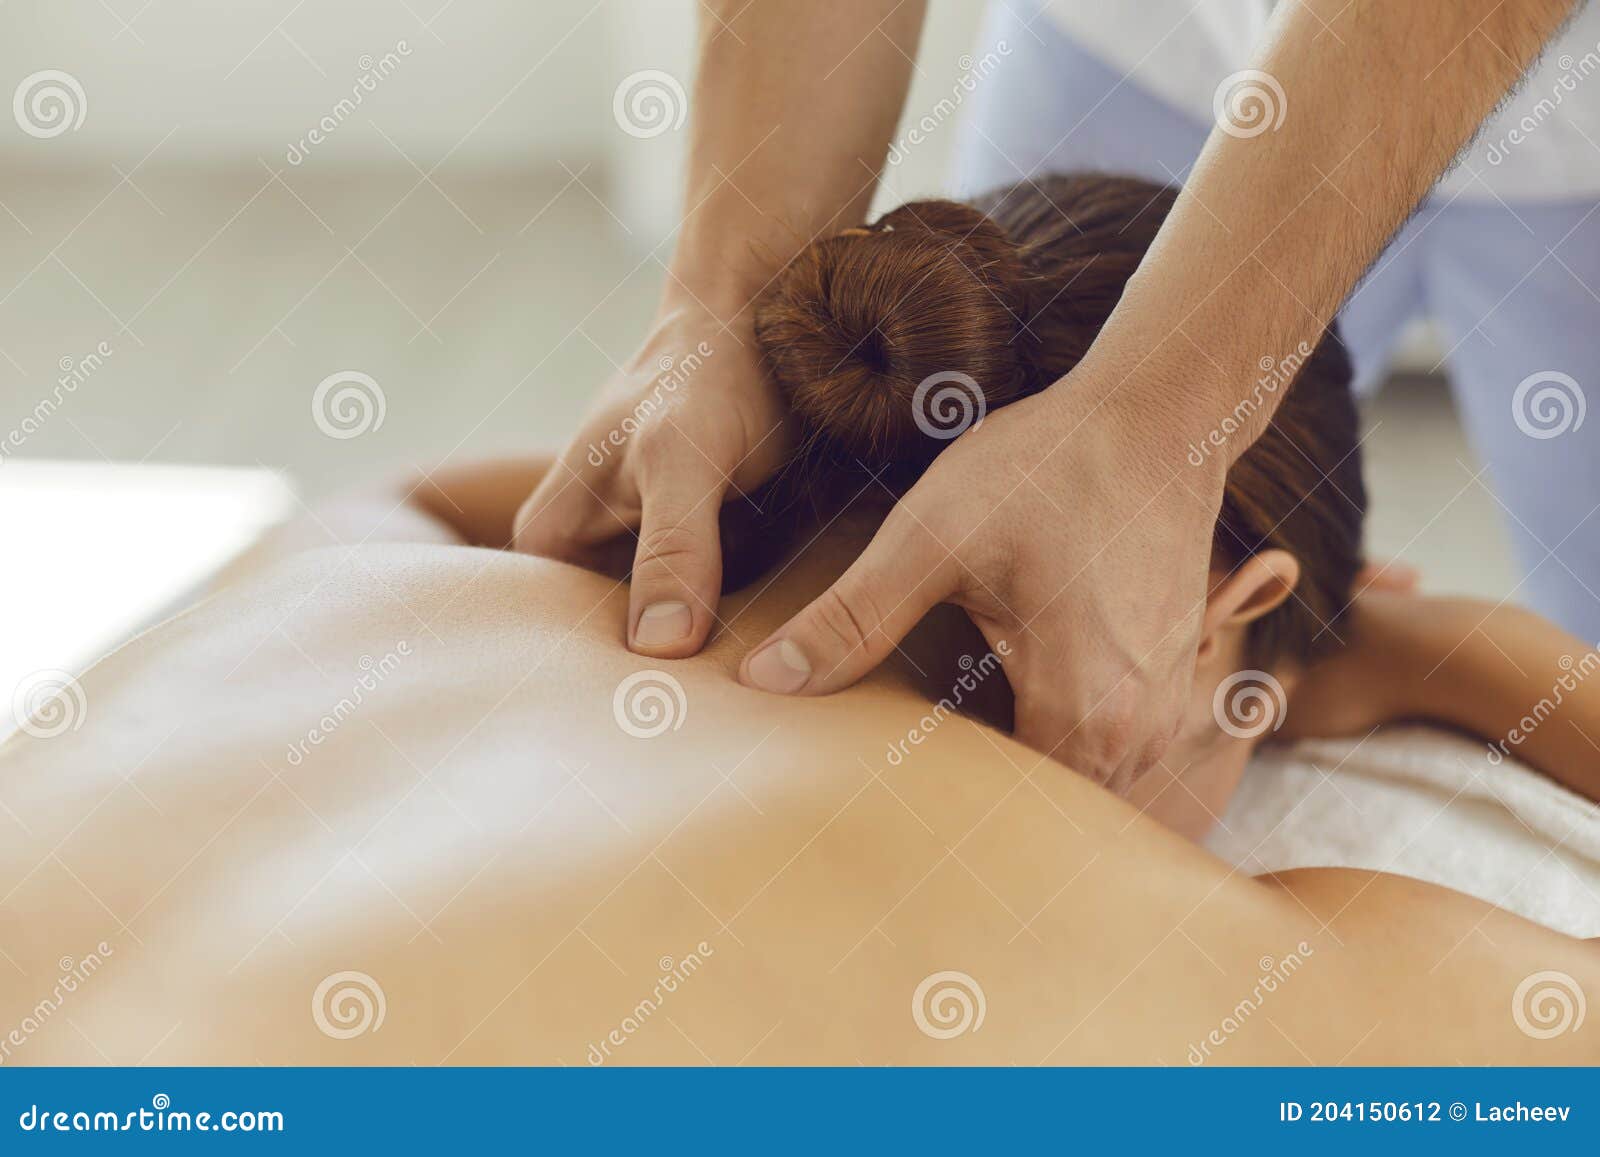 young woman enjoying relaxing remedial body massage done by professional masseur